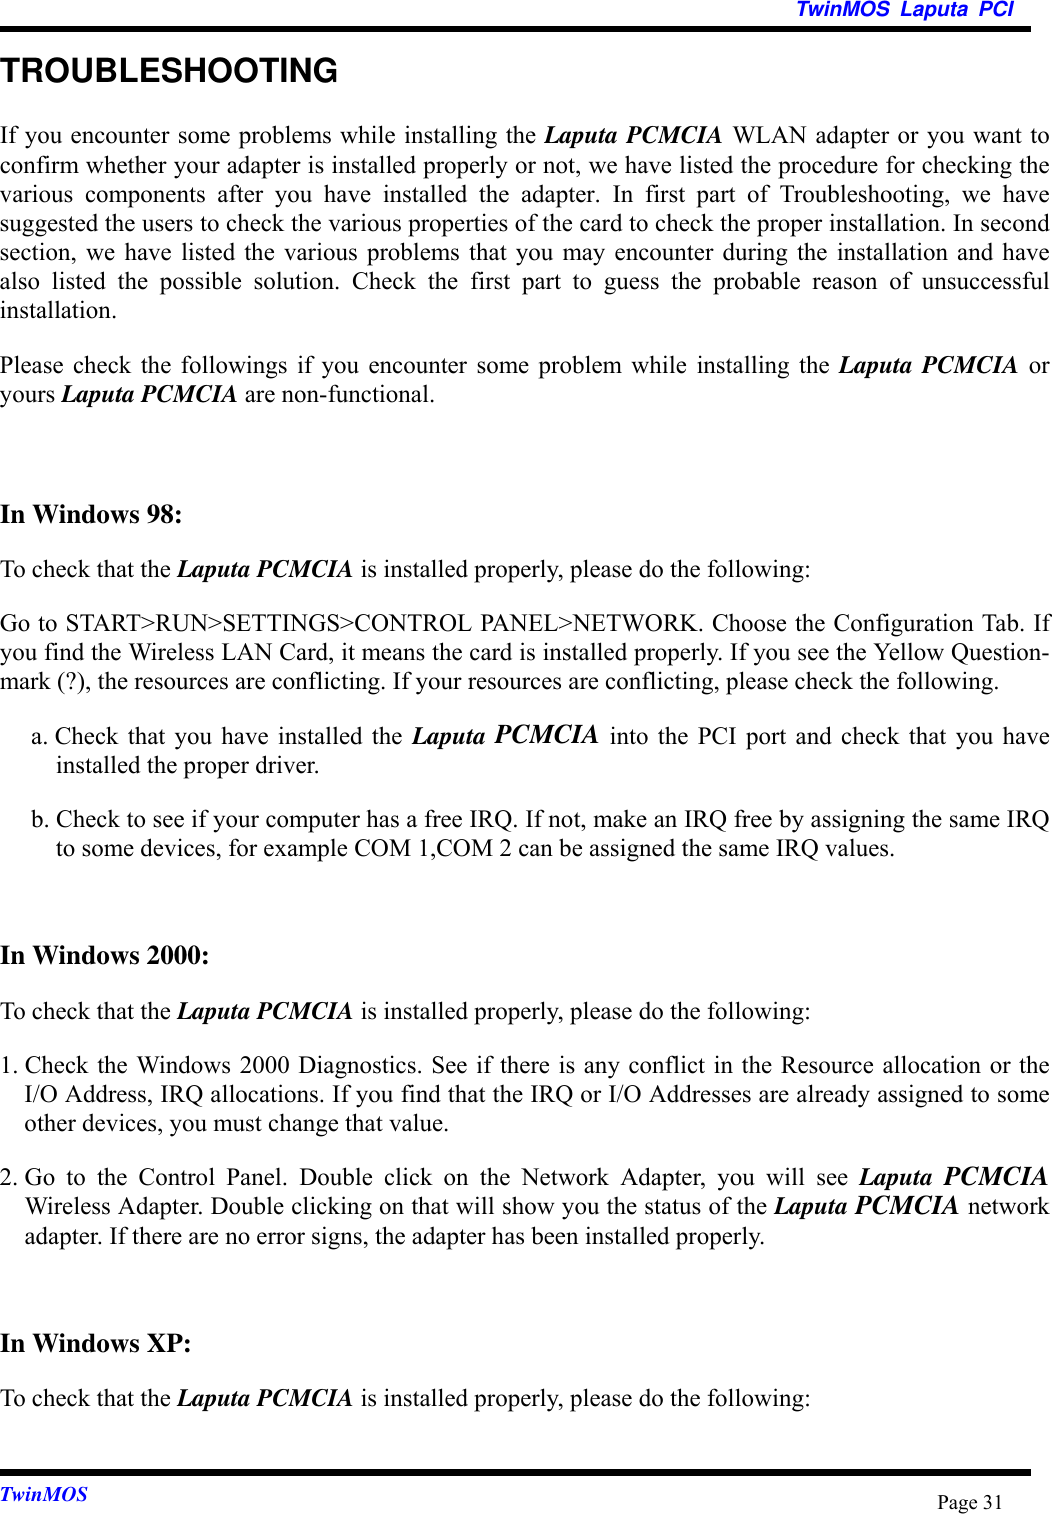 TwinMOS Laputa PCITwinMOS Page 31TROUBLESHOOTINGIf you encounter some problems while installing the Laputa PCMCIA WLAN adapter or you want toconfirm whether your adapter is installed properly or not, we have listed the procedure for checking thevarious components after you have installed the adapter. In first part of Troubleshooting, we havesuggested the users to check the various properties of the card to check the proper installation. In secondsection, we have listed the various problems that you may encounter during the installation and havealso listed the possible solution. Check the first part to guess the probable reason of unsuccessfulinstallation.Please check the followings if you encounter some problem while installing the Laputa PCMCIA oryours Laputa PCMCIA are non-functional.In Windows 98:To check that the Laputa PCMCIA is installed properly, please do the following:Go to START&gt;RUN&gt;SETTINGS&gt;CONTROL PANEL&gt;NETWORK. Choose the Configuration Tab. Ifyou find the Wireless LAN Card, it means the card is installed properly. If you see the Yellow Question-mark (?), the resources are conflicting. If your resources are conflicting, please check the following.a. Check that you have installed the Laputa PCMCIA into the PCI port and check that you haveinstalled the proper driver.b. Check to see if your computer has a free IRQ. If not, make an IRQ free by assigning the same IRQto some devices, for example COM 1,COM 2 can be assigned the same IRQ values.In Windows 2000:To check that the Laputa PCMCIA is installed properly, please do the following:1. Check the Windows 2000 Diagnostics. See if there is any conflict in the Resource allocation or theI/O Address, IRQ allocations. If you find that the IRQ or I/O Addresses are already assigned to someother devices, you must change that value.2. Go to the Control Panel. Double click on the Network Adapter, you will see Laputa  PCMCIAWireless Adapter. Double clicking on that will show you the status of the Laputa PCMCIA networkadapter. If there are no error signs, the adapter has been installed properly.In Windows XP:To check that the Laputa PCMCIA is installed properly, please do the following: